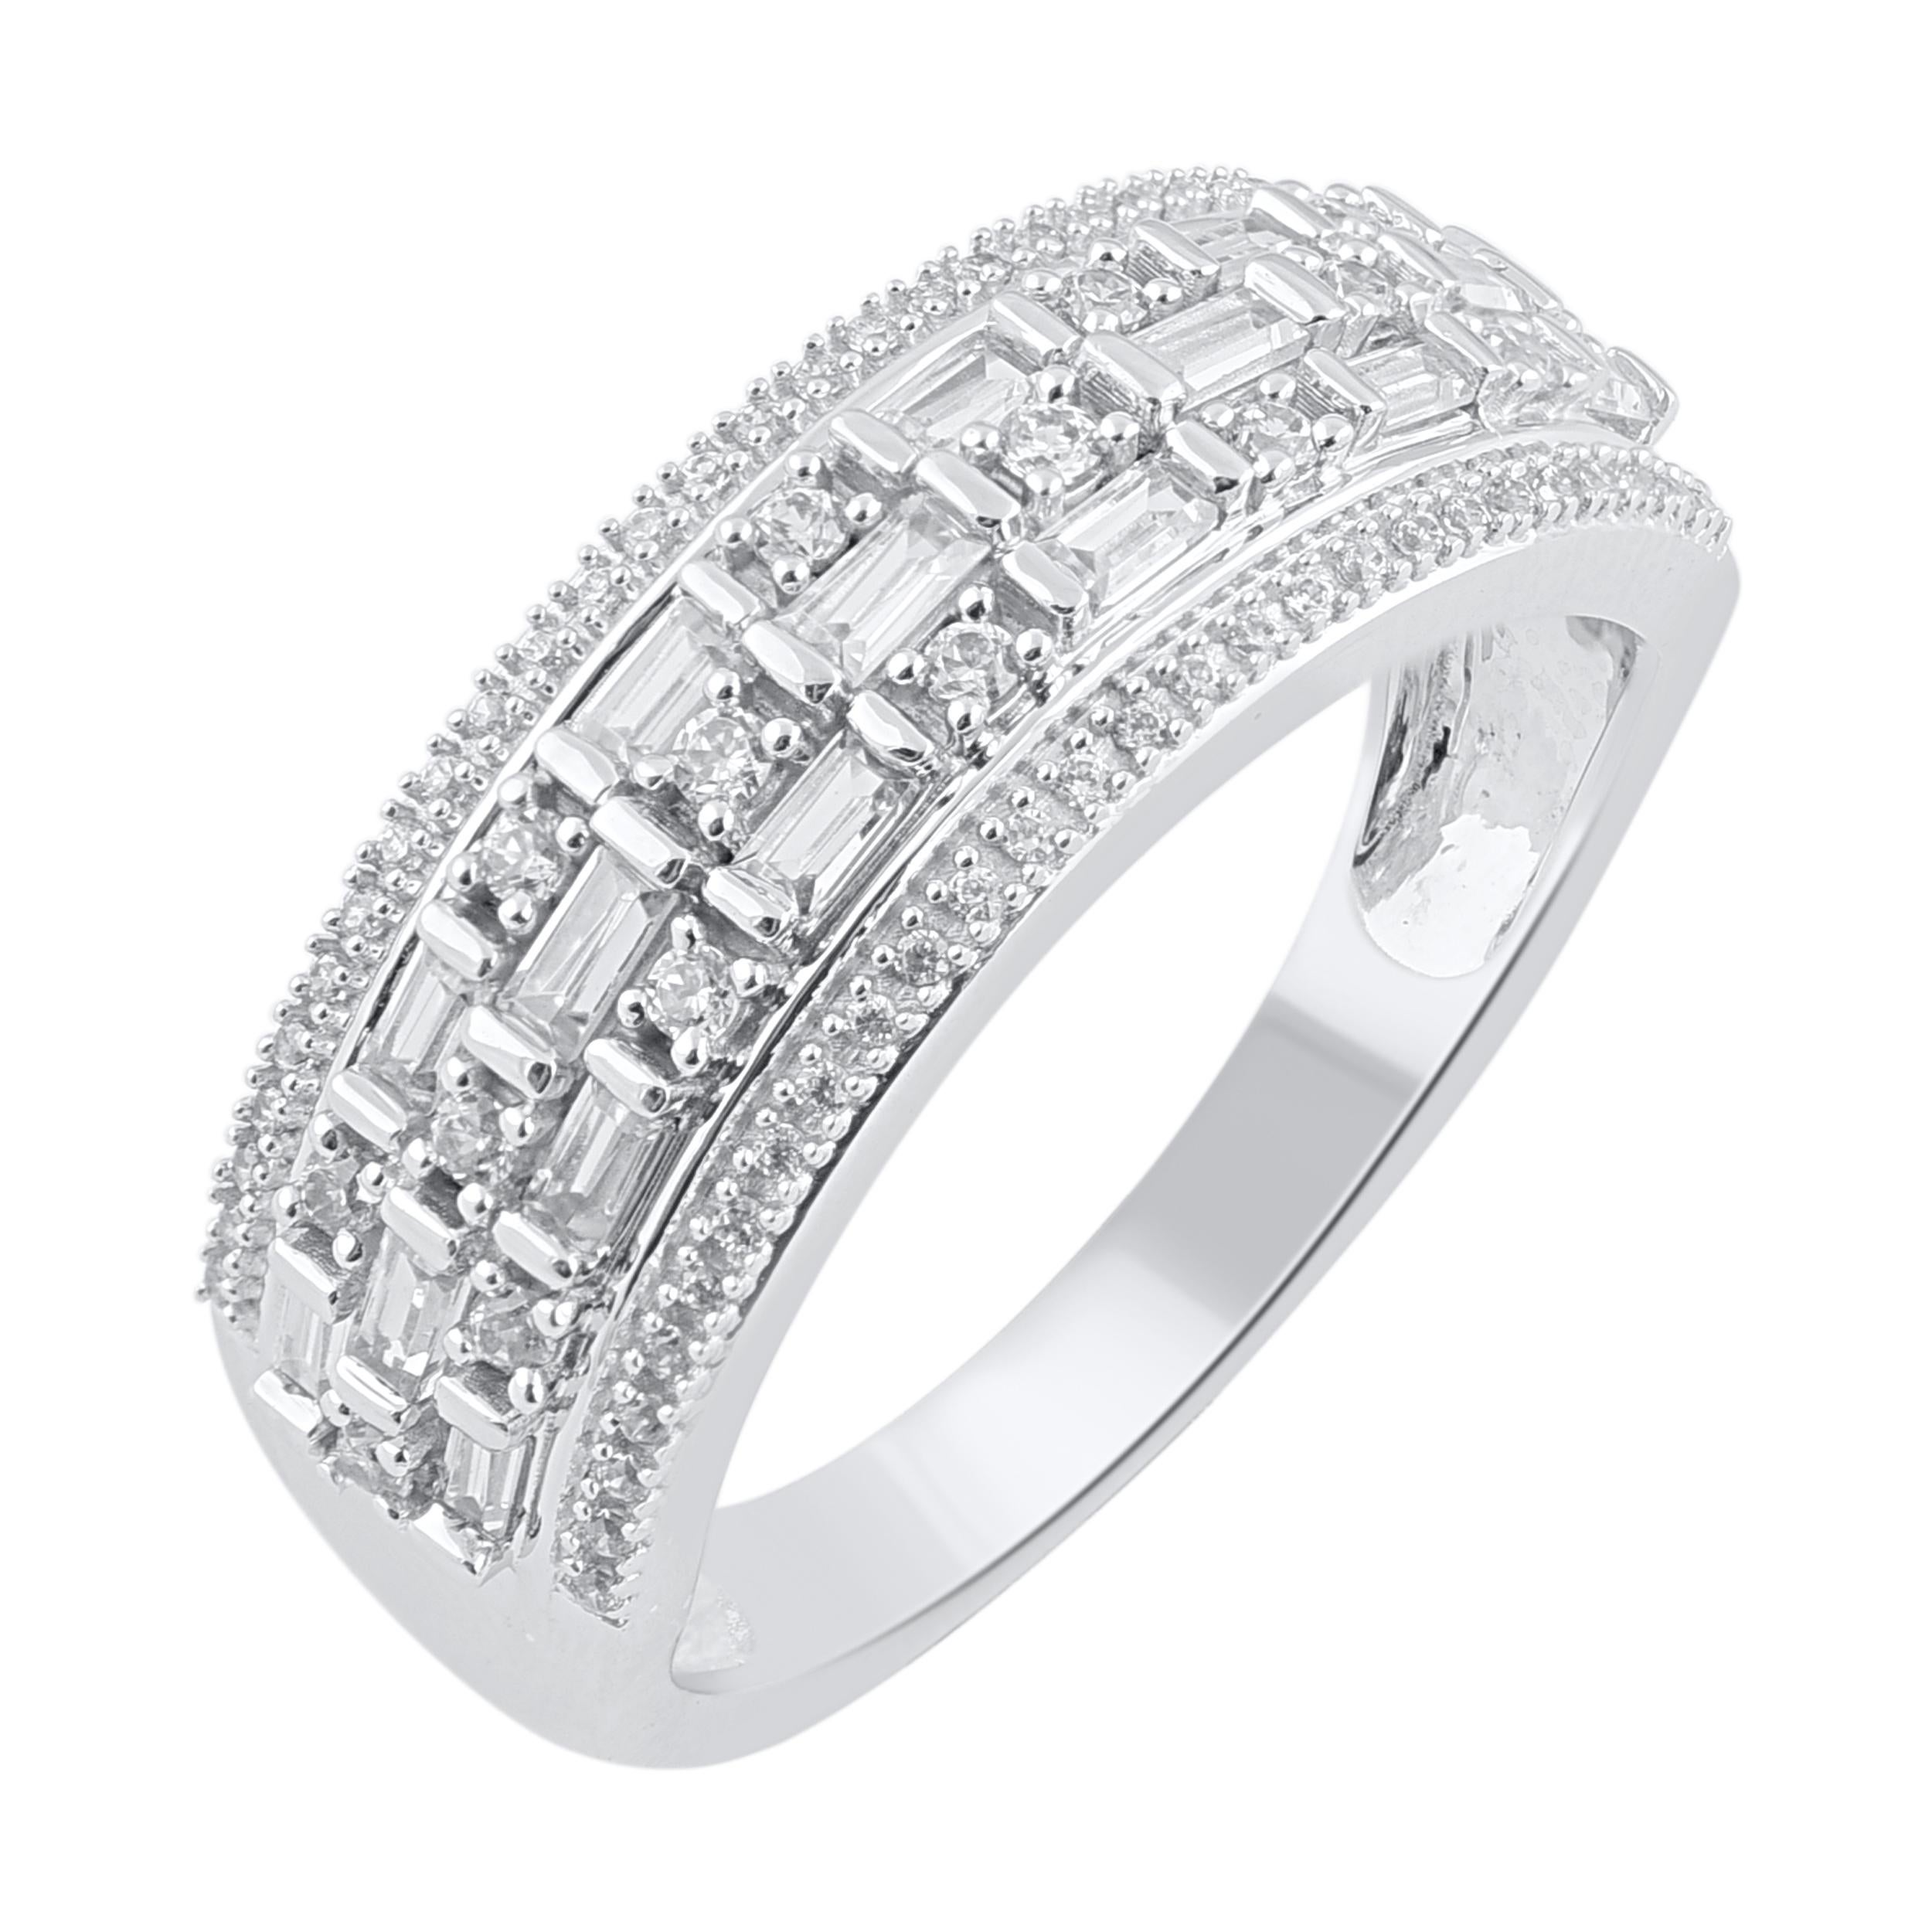 Make that special moment magical with the exquisite diamond engagement ring. This ring is beautifully crafted in 18 karat white gold and embedded with 87 brilliant, single cut round diamonds & baguette diamond set in prong & channel setting. The